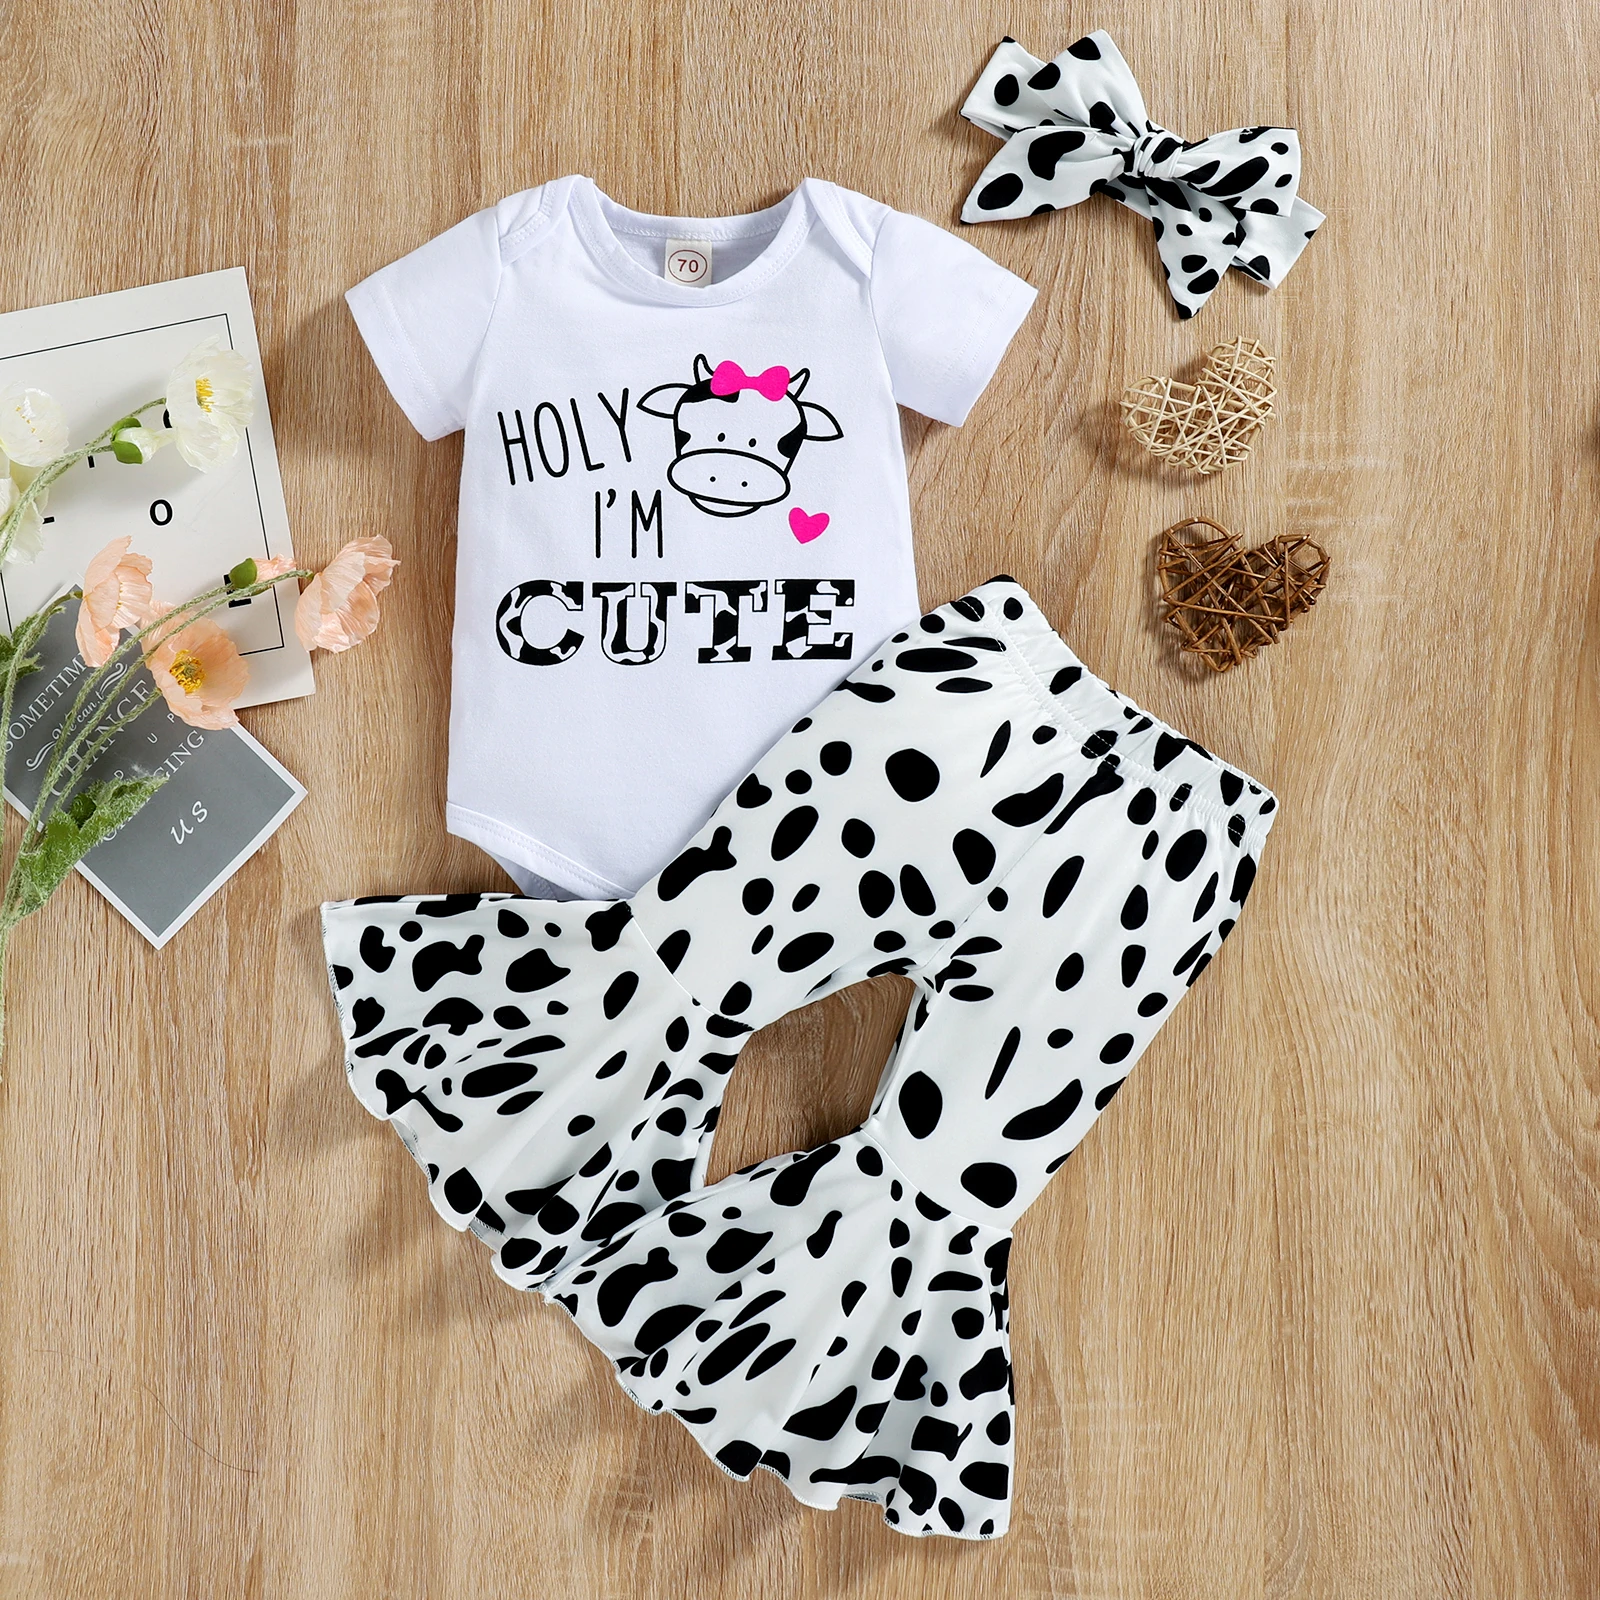 Infant Baby Girls Cute Clothes Set, Letter Cow Head Print Short Sleeve Romper Milk Cow Skin Pattern Flare Pants Bow Headband baby dress and set